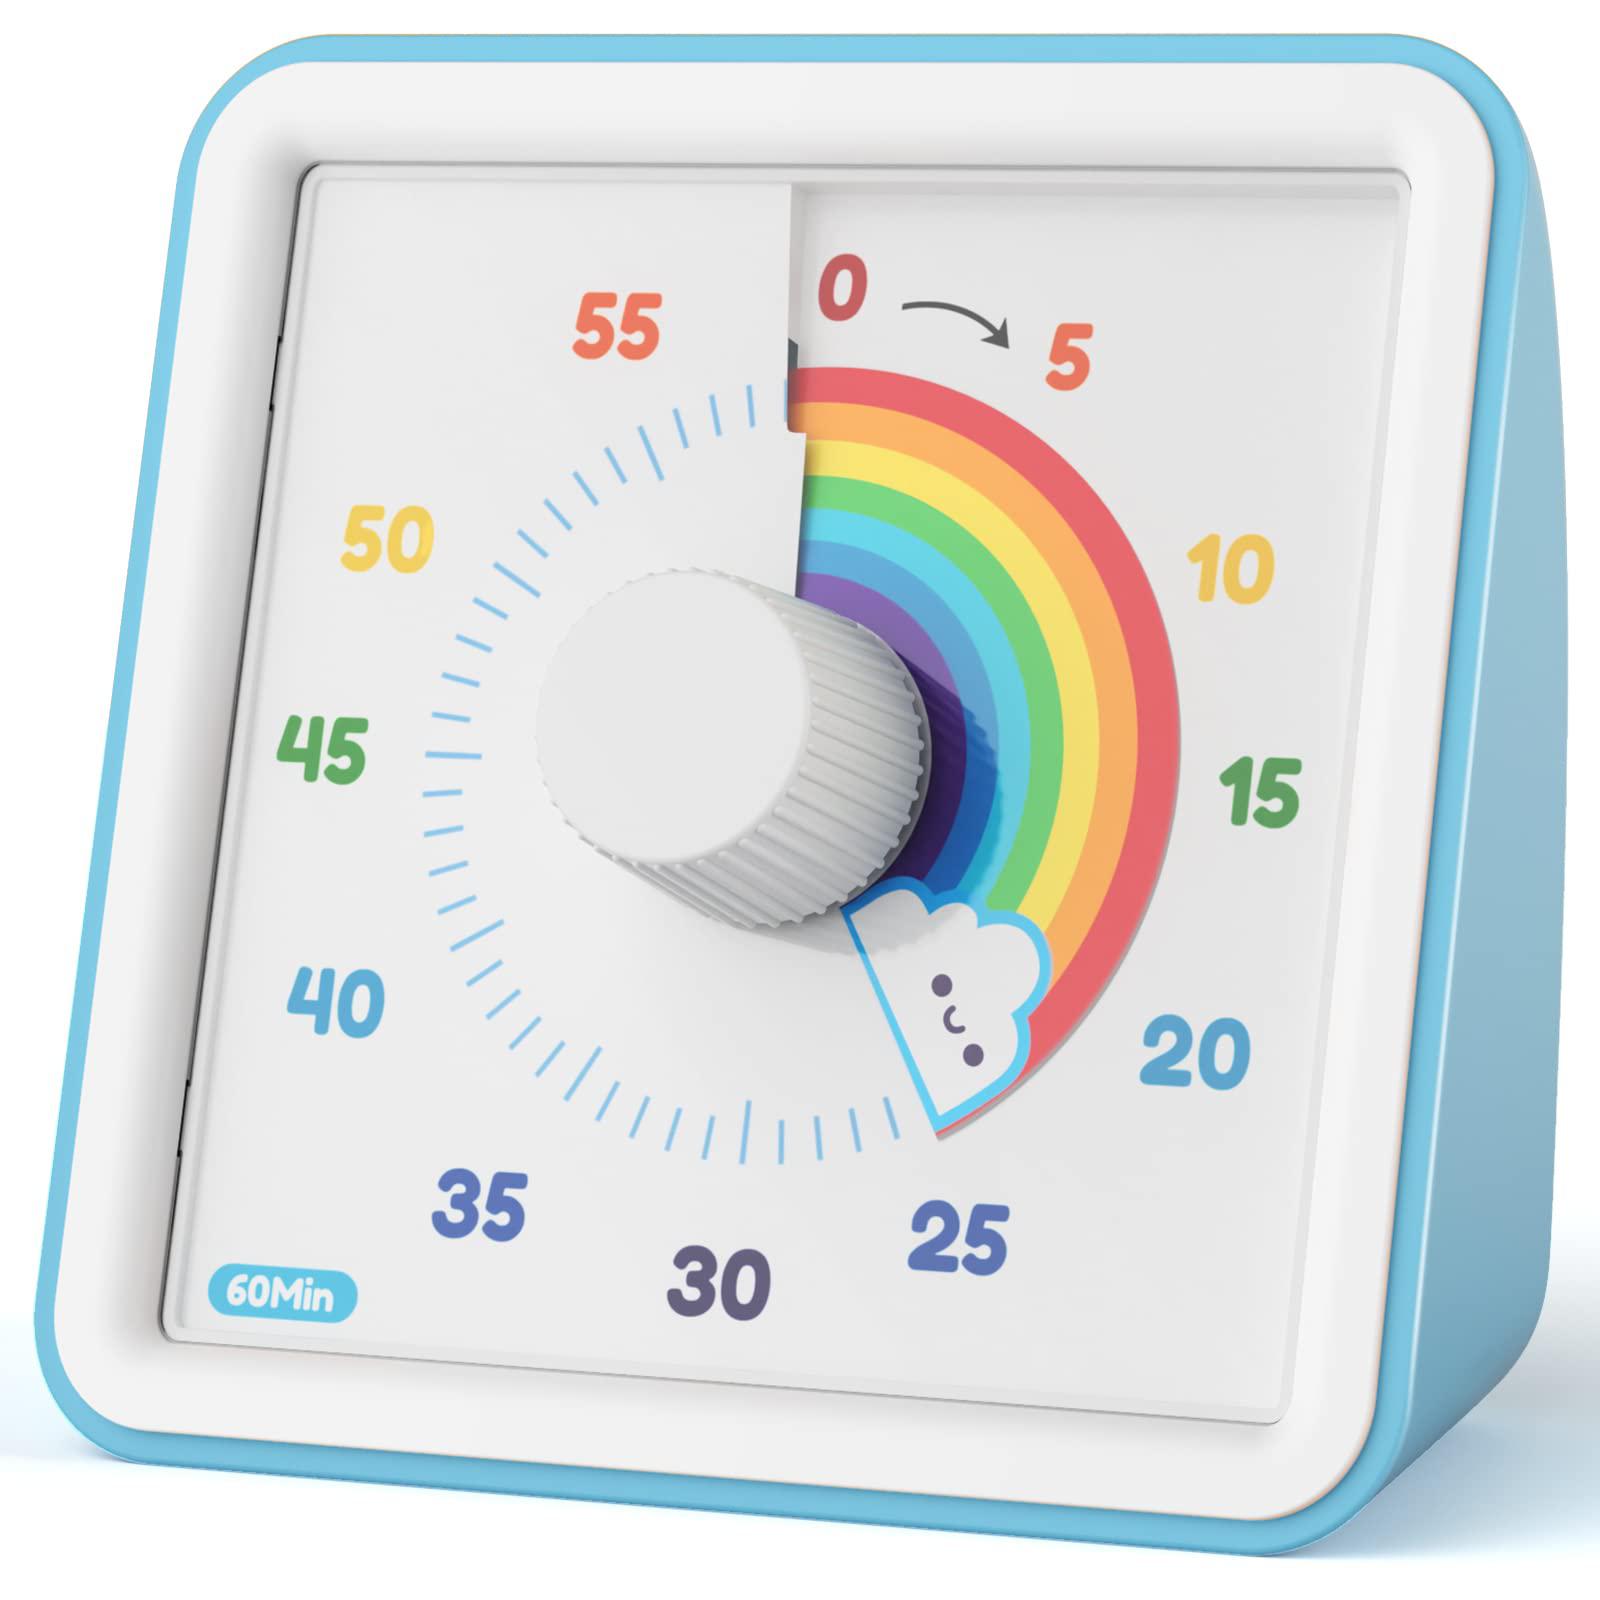 liorque 60 minute visual timer for kids, visual countdown timer for classroom office kitchen with 'rainbow' pattern design, p